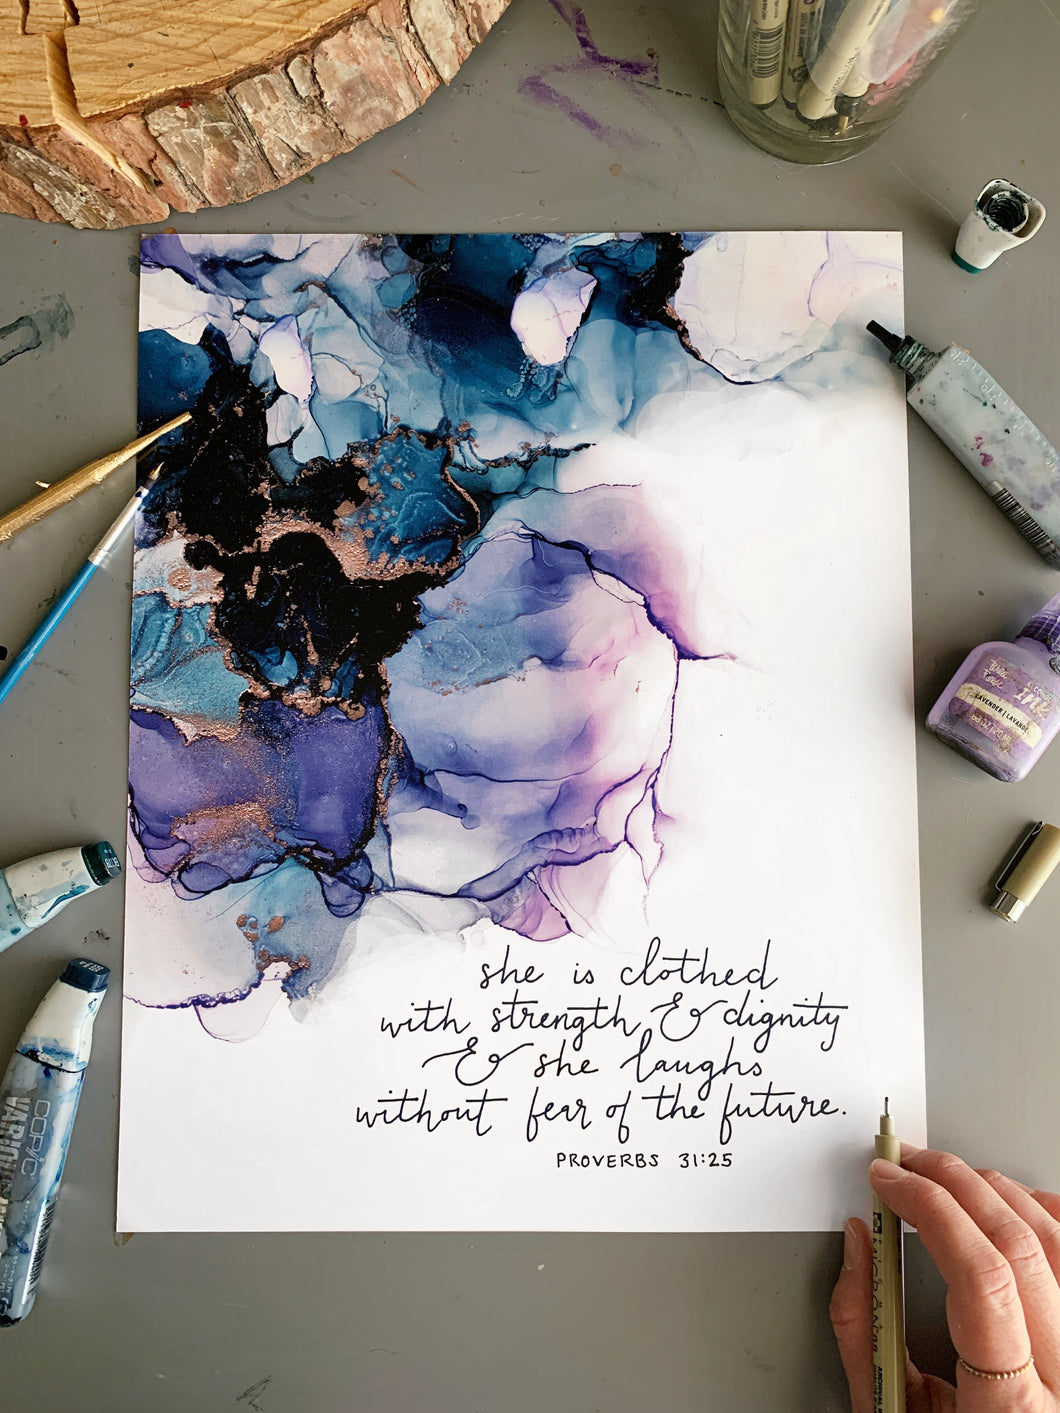 Proverbs 31:25 Bible verse wall art, alcohol ink painting